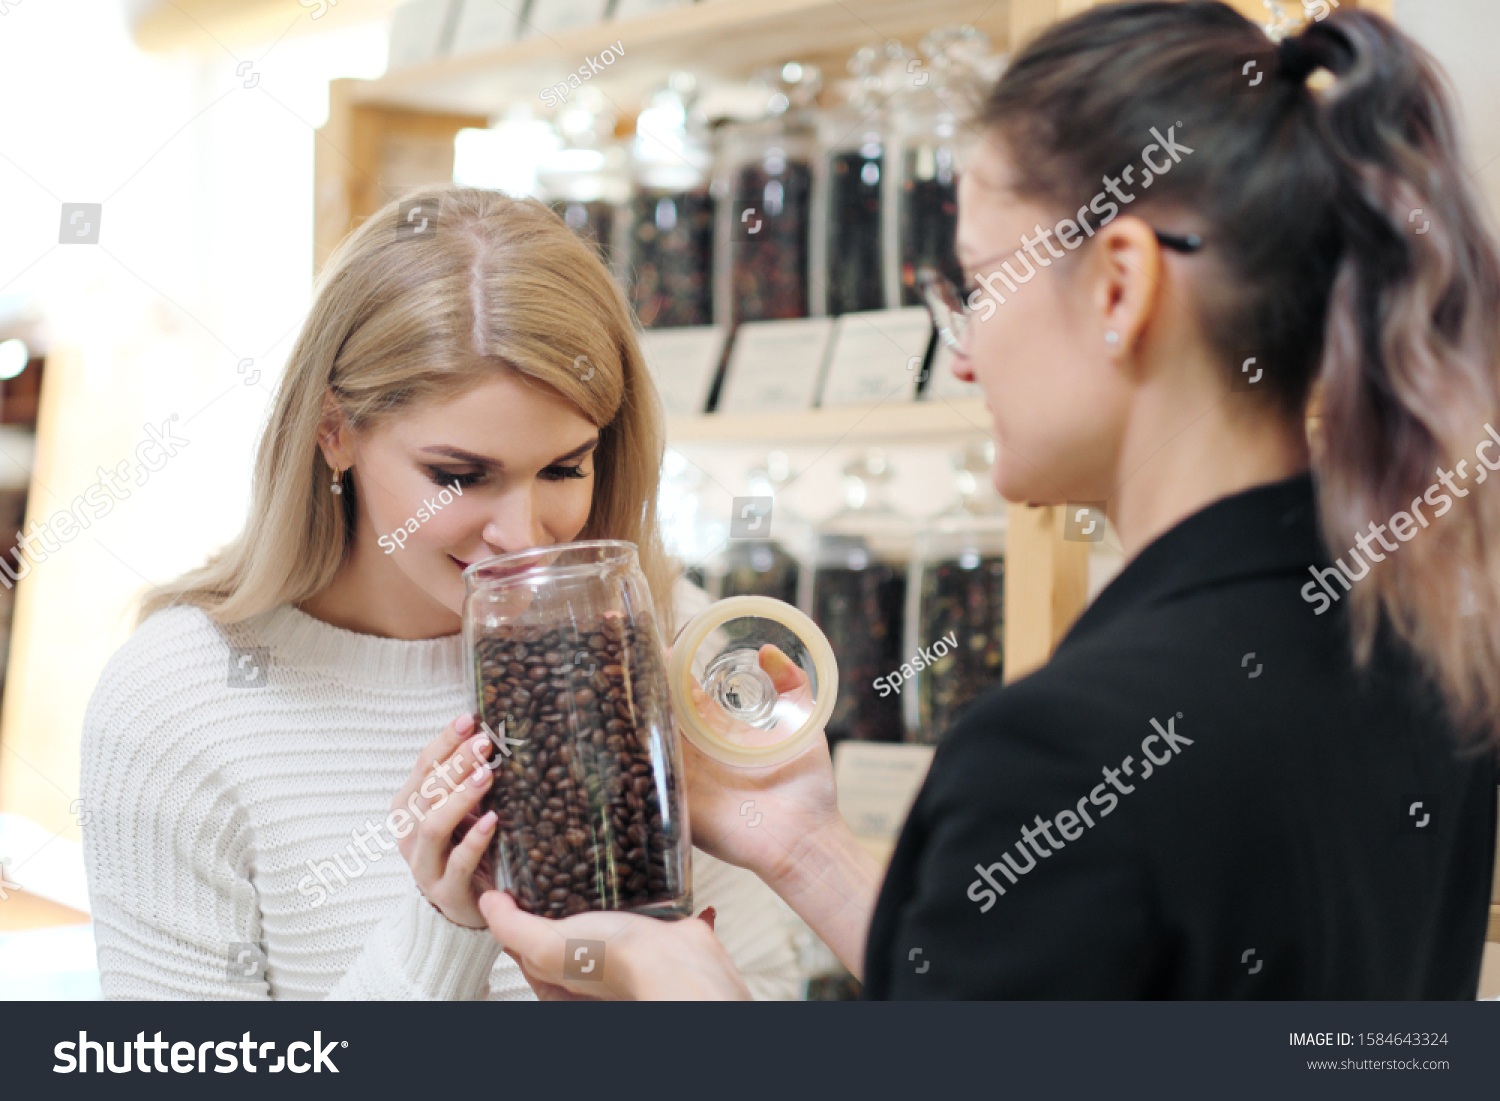 A female shopper in the store chooses a grain coffee. The seller helps the buyer choose. #1584643324